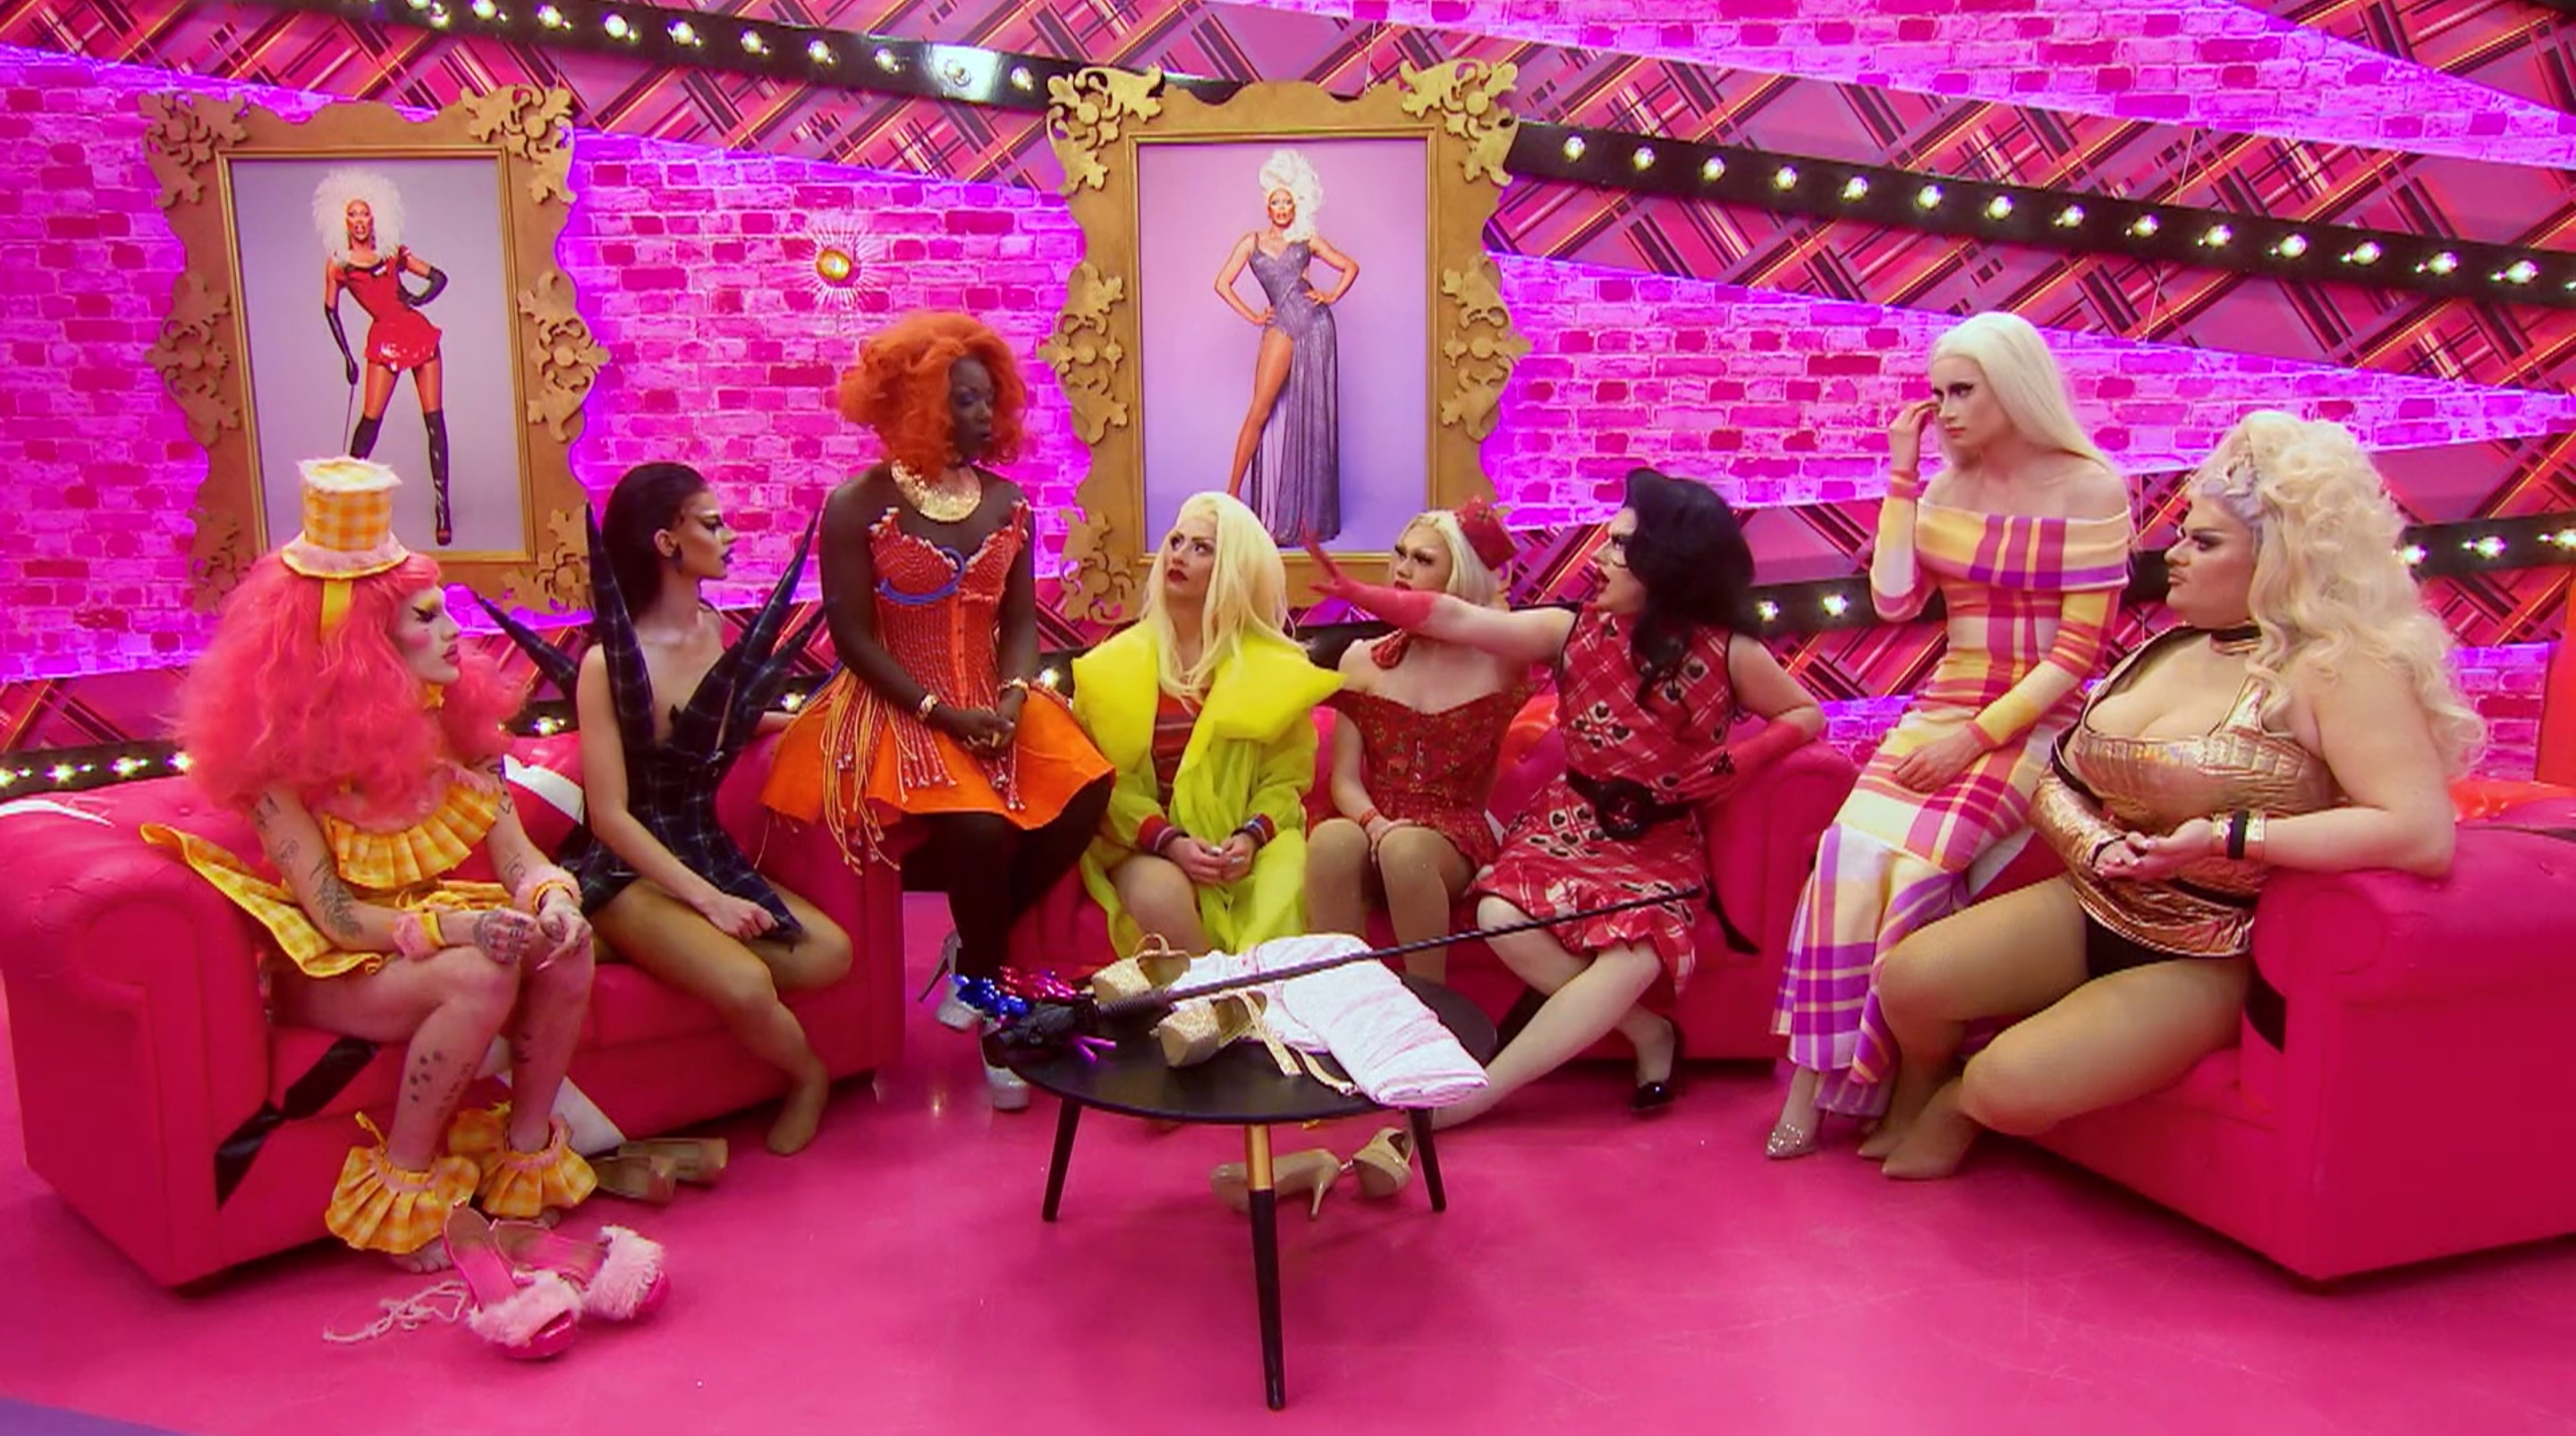 The girls debriefing after Veronica's elimination.